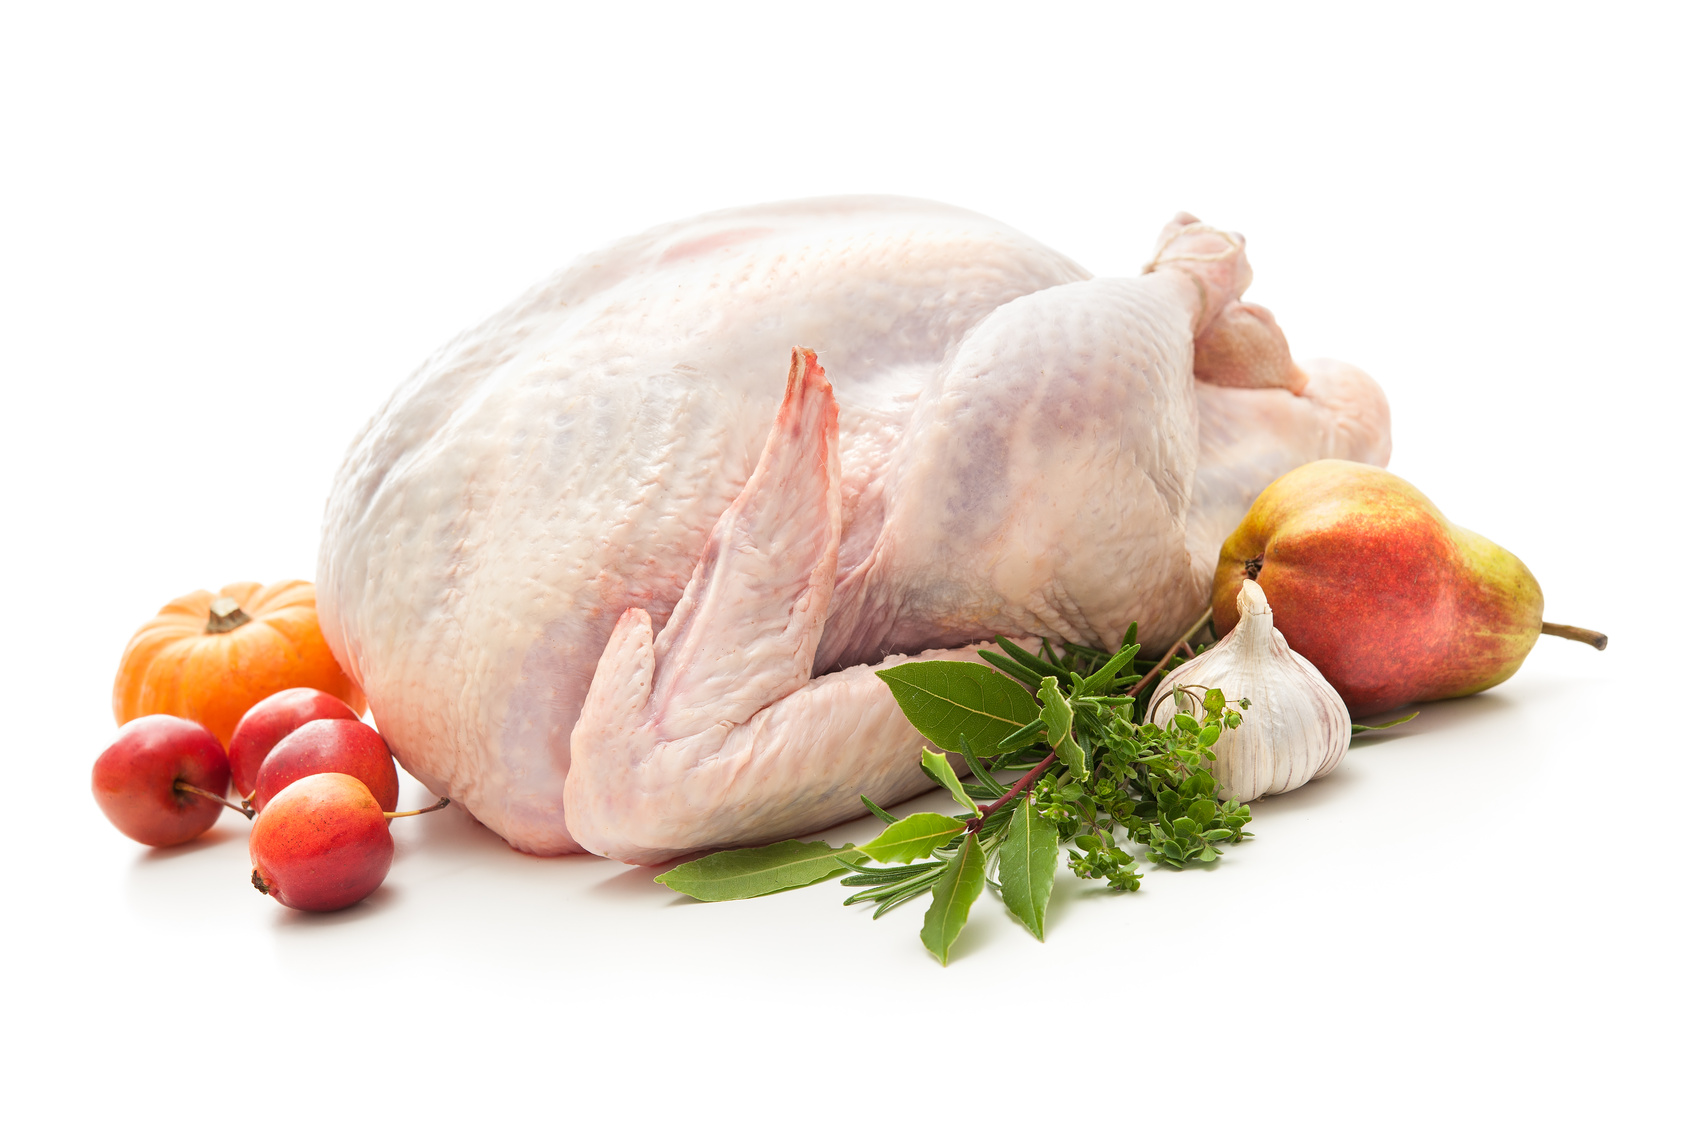 Uncooked turkey with herbs isolated on white background